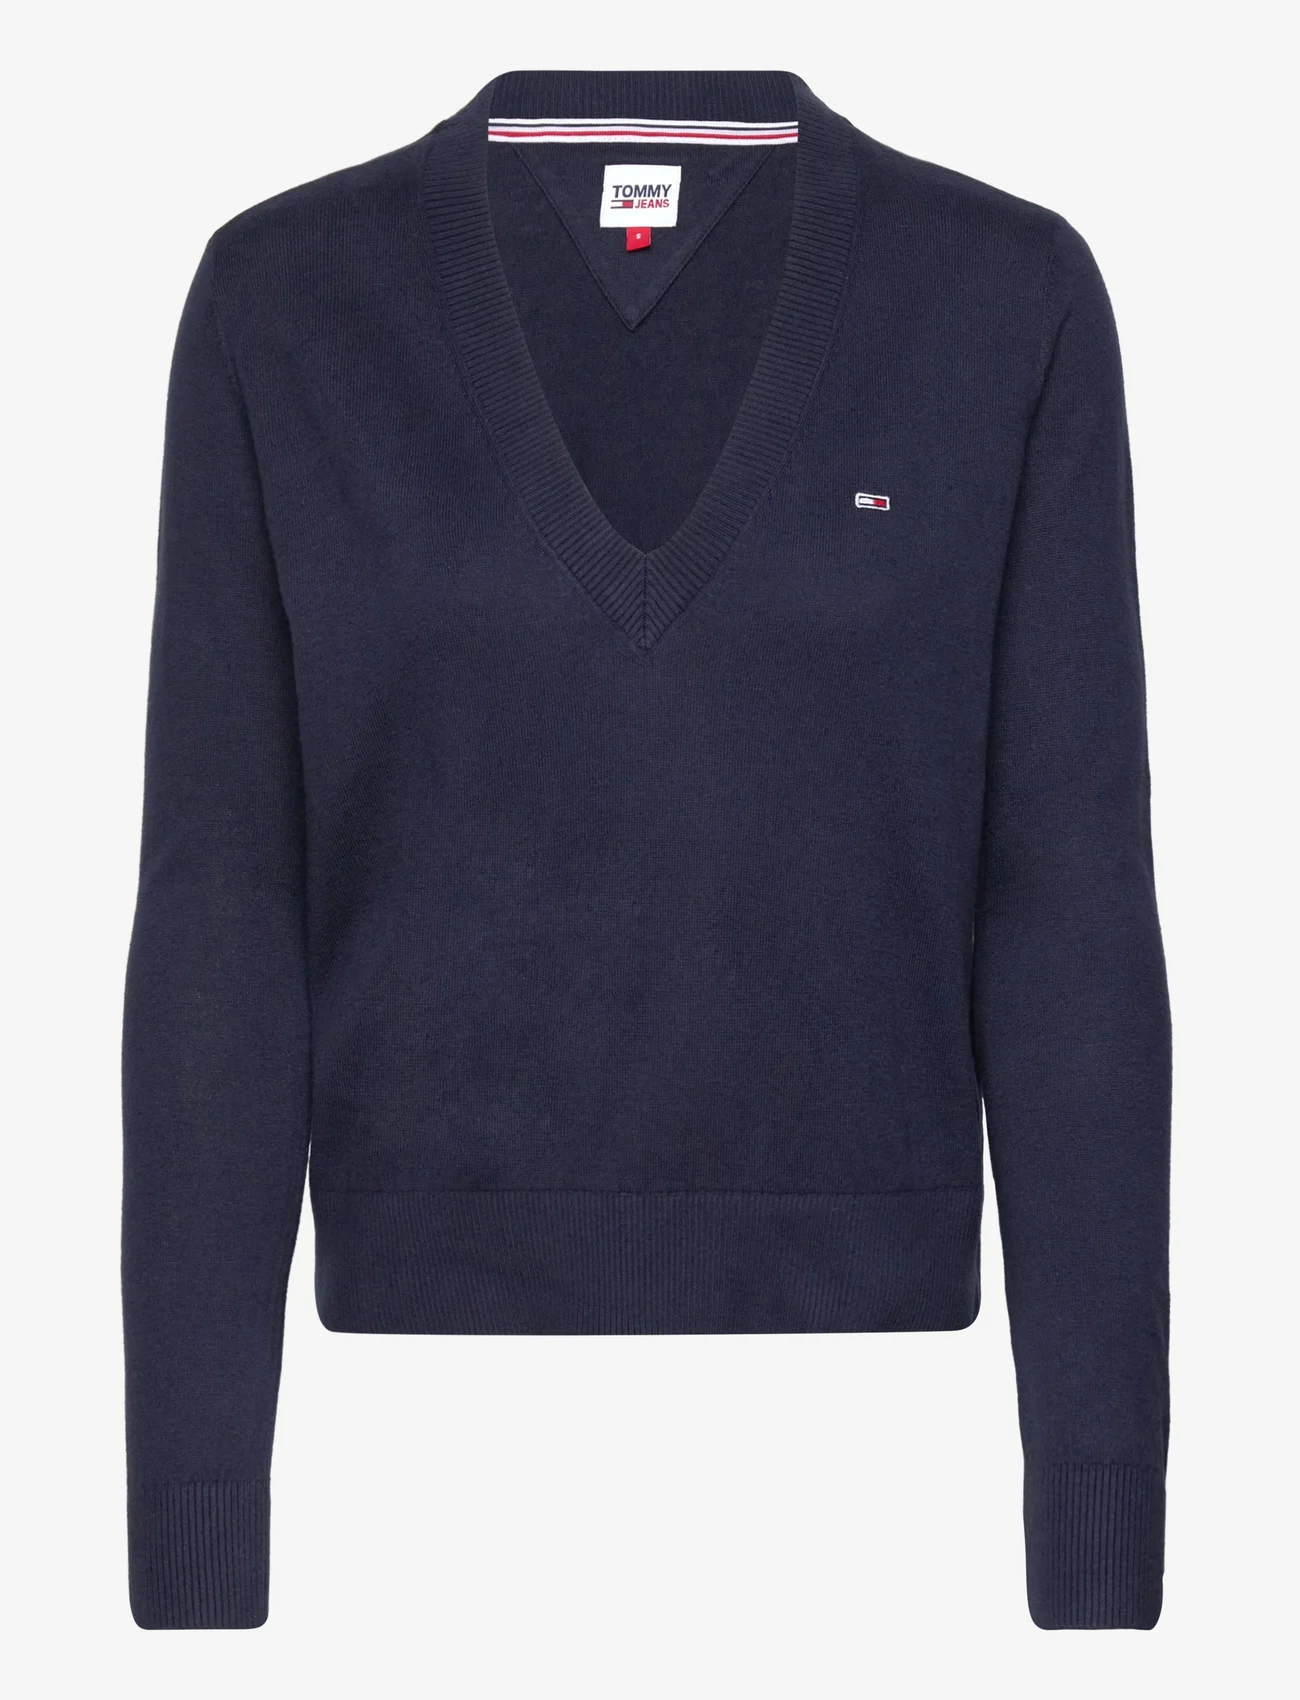 Tommy Jeans - TJW ESSENTIAL VNECK SWEATER - pullover - twilight navy - 0